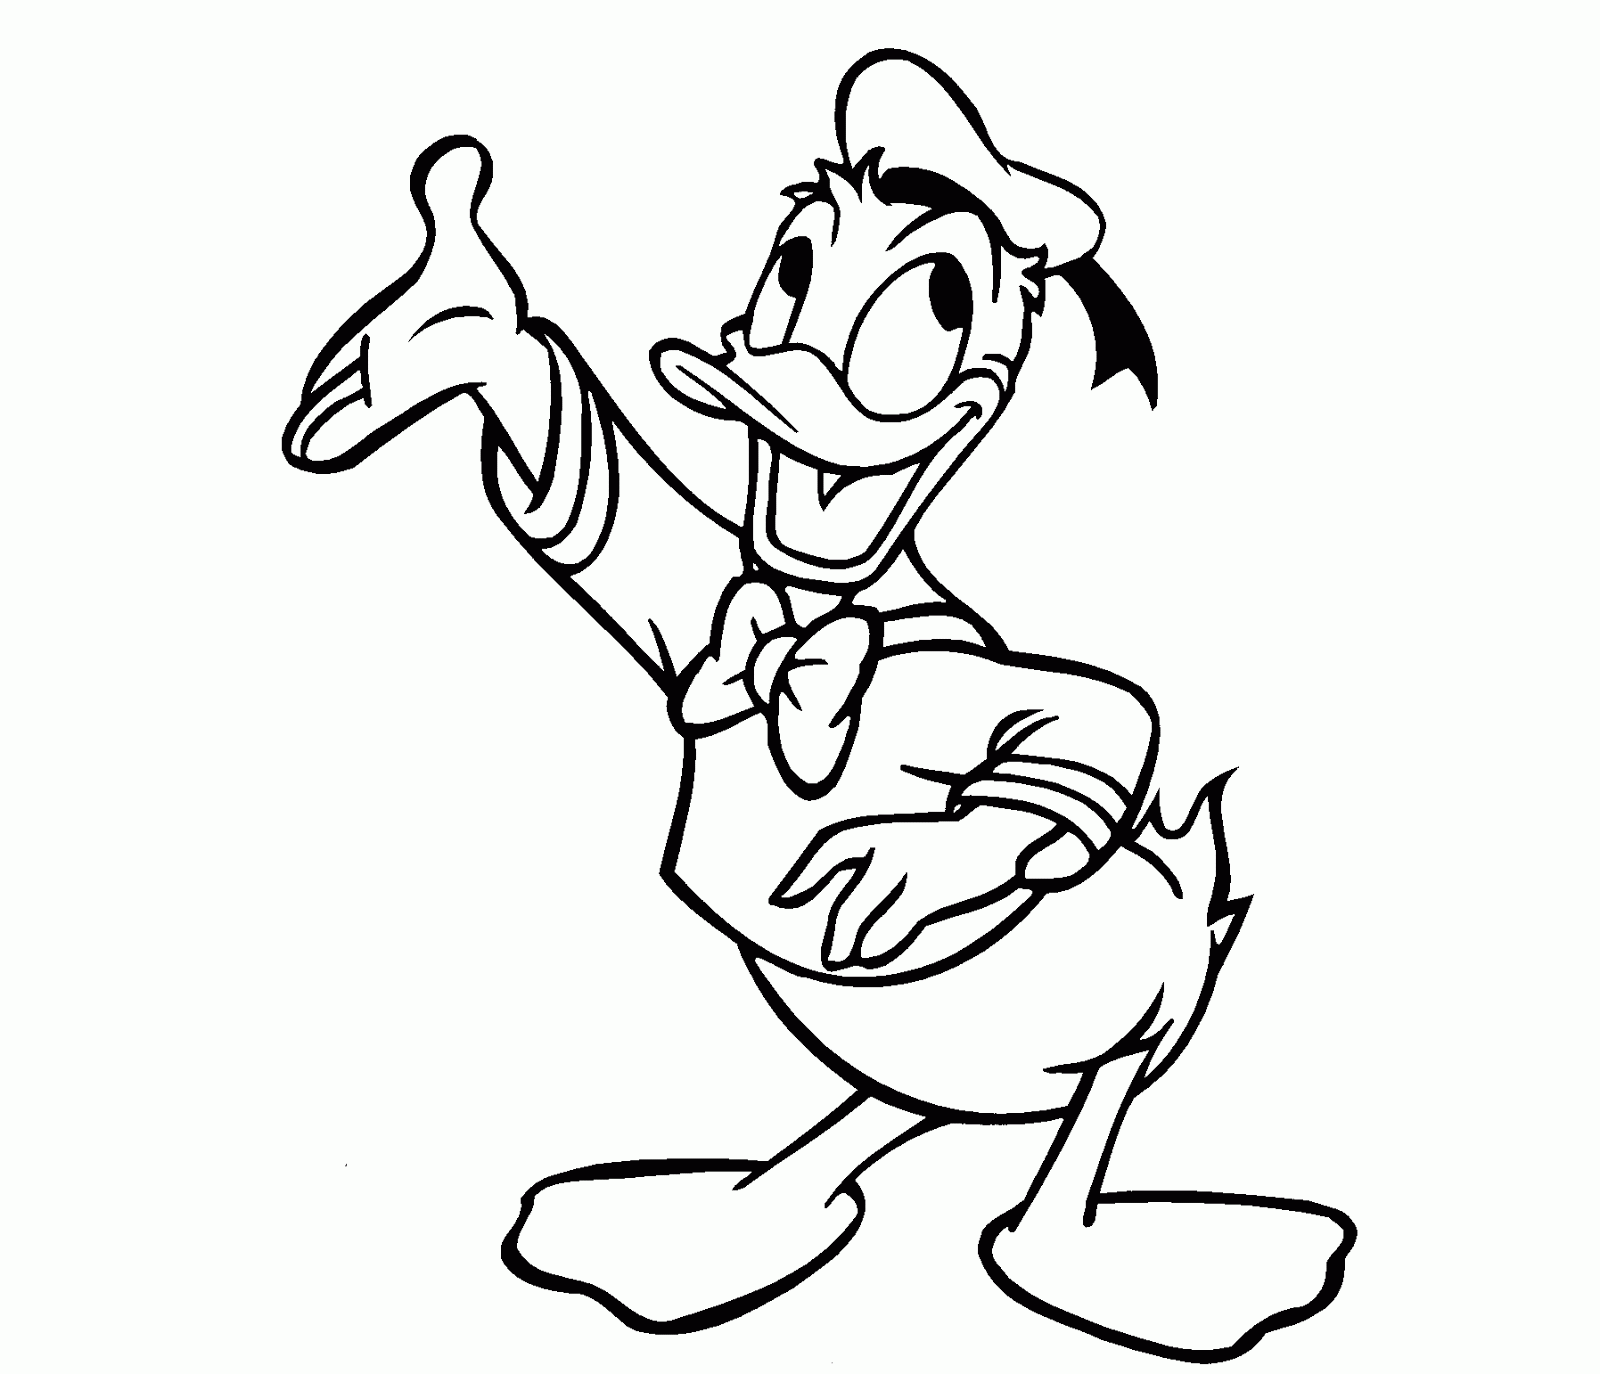 Cartoon Sketch Drawing Donald Duck with simple drawing